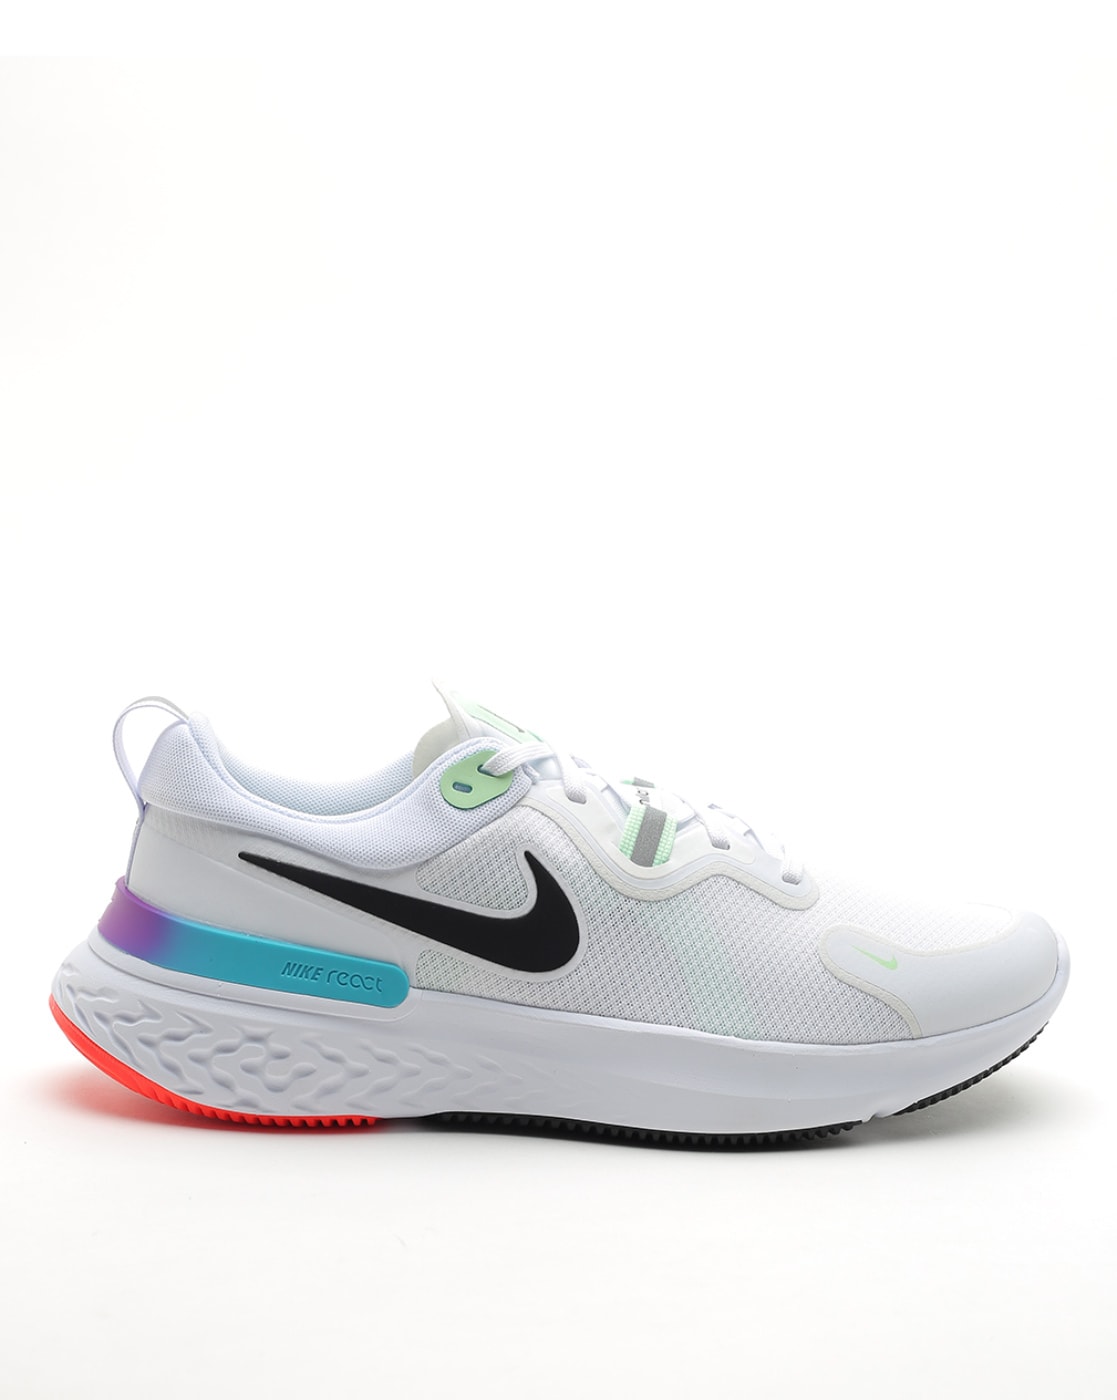 nike sport shoes india